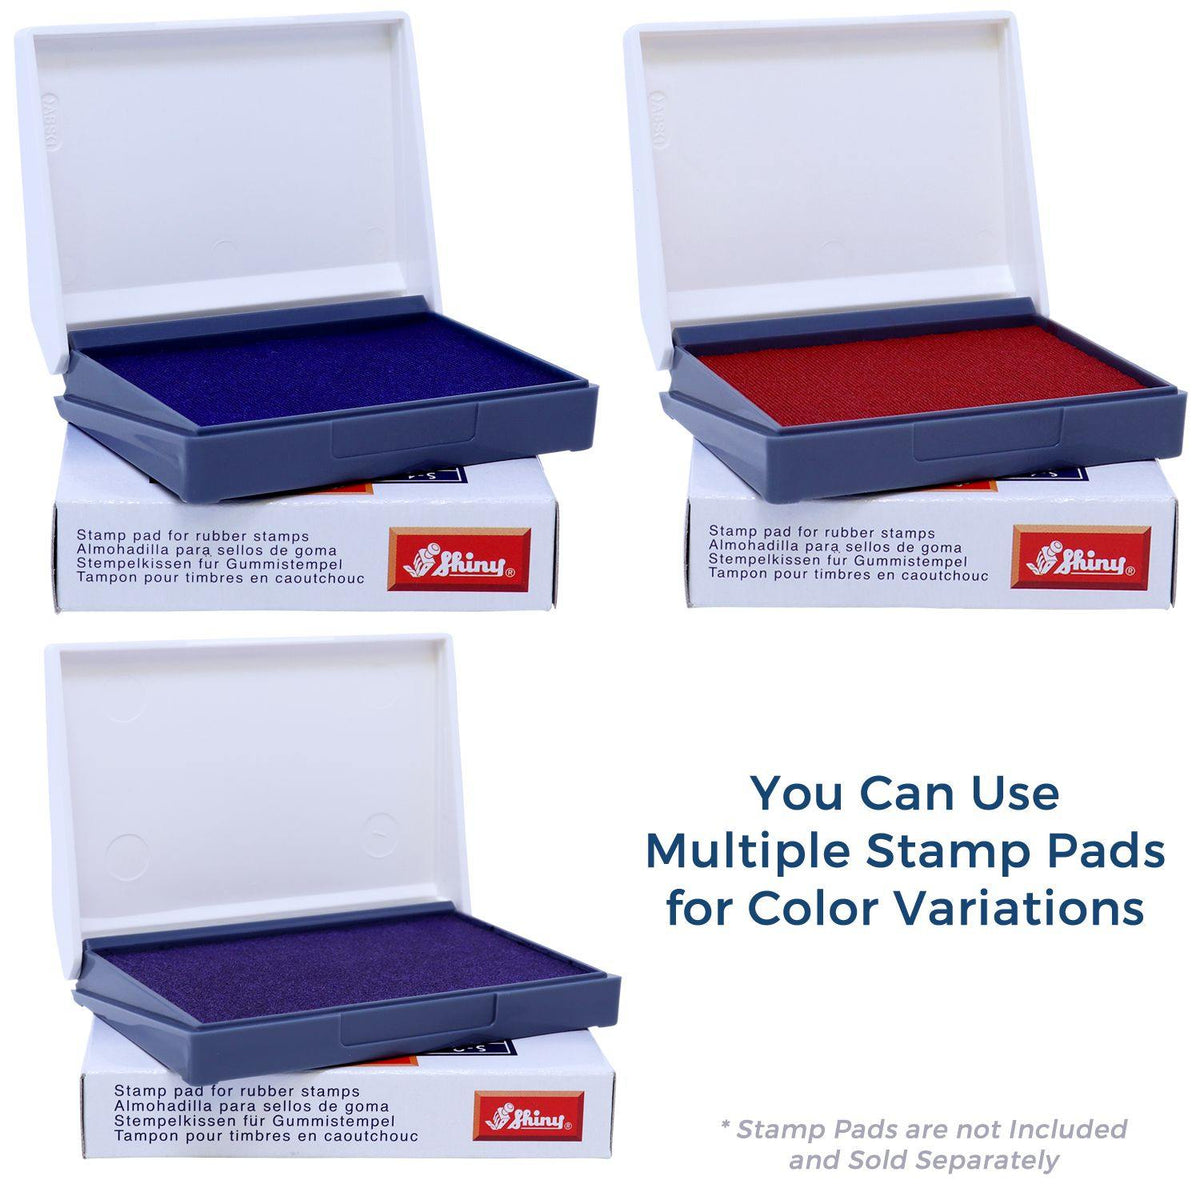 Stamp Pads for Certificada Rubber Stamp Available